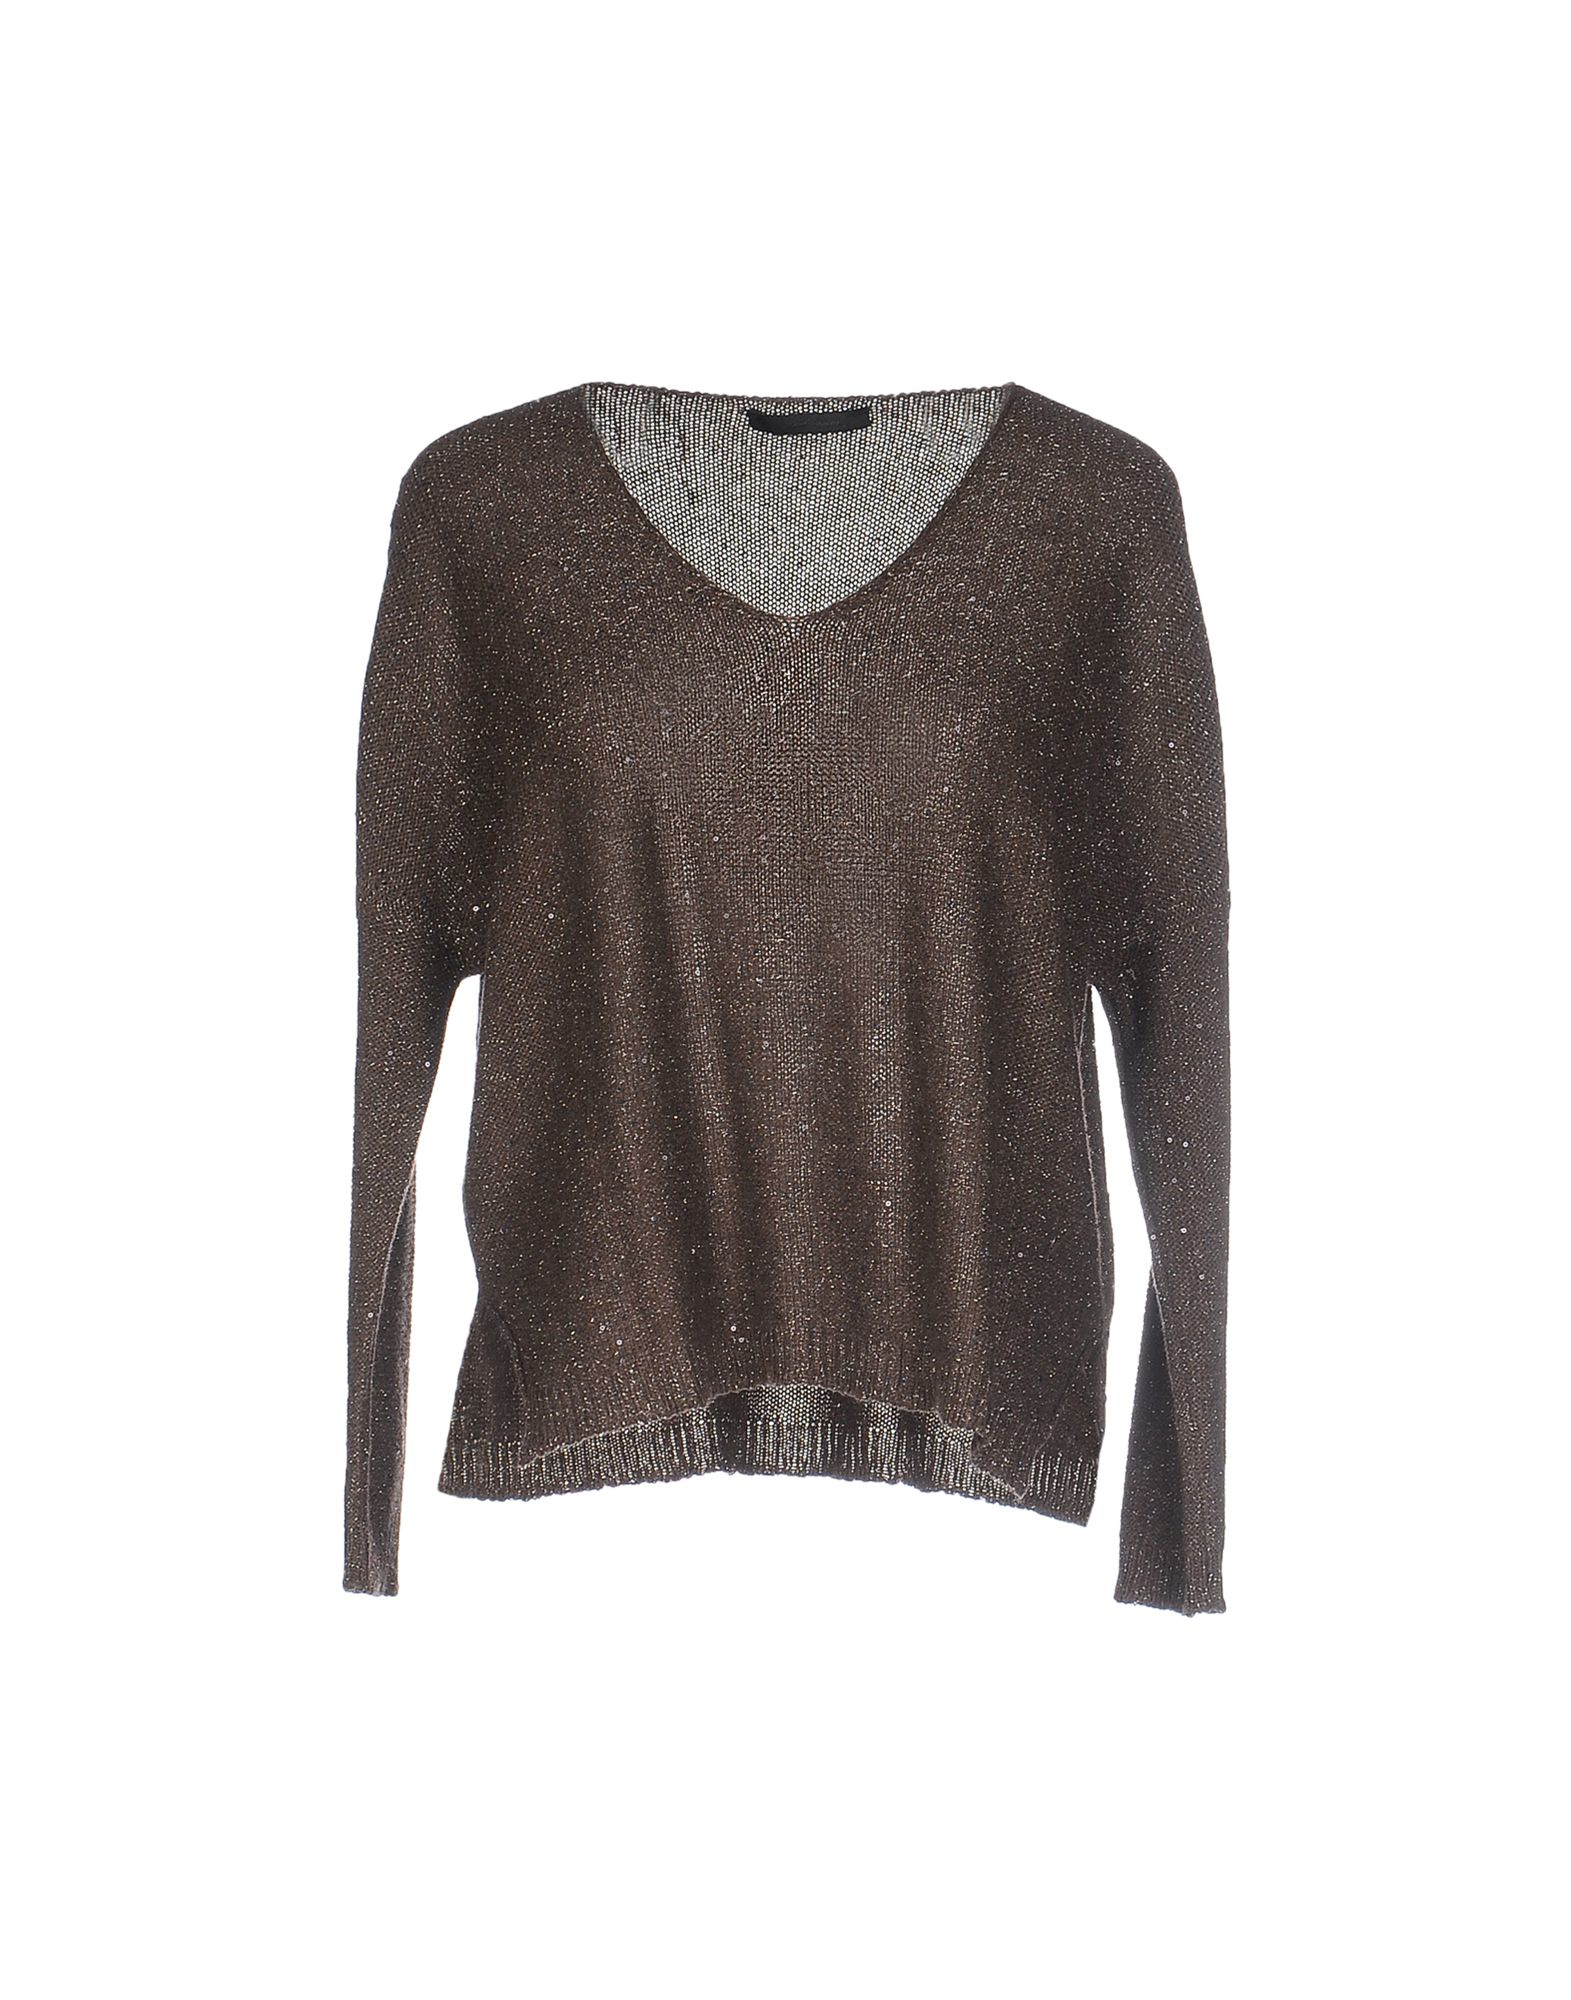 Lyst - Les copains Sweater in Brown